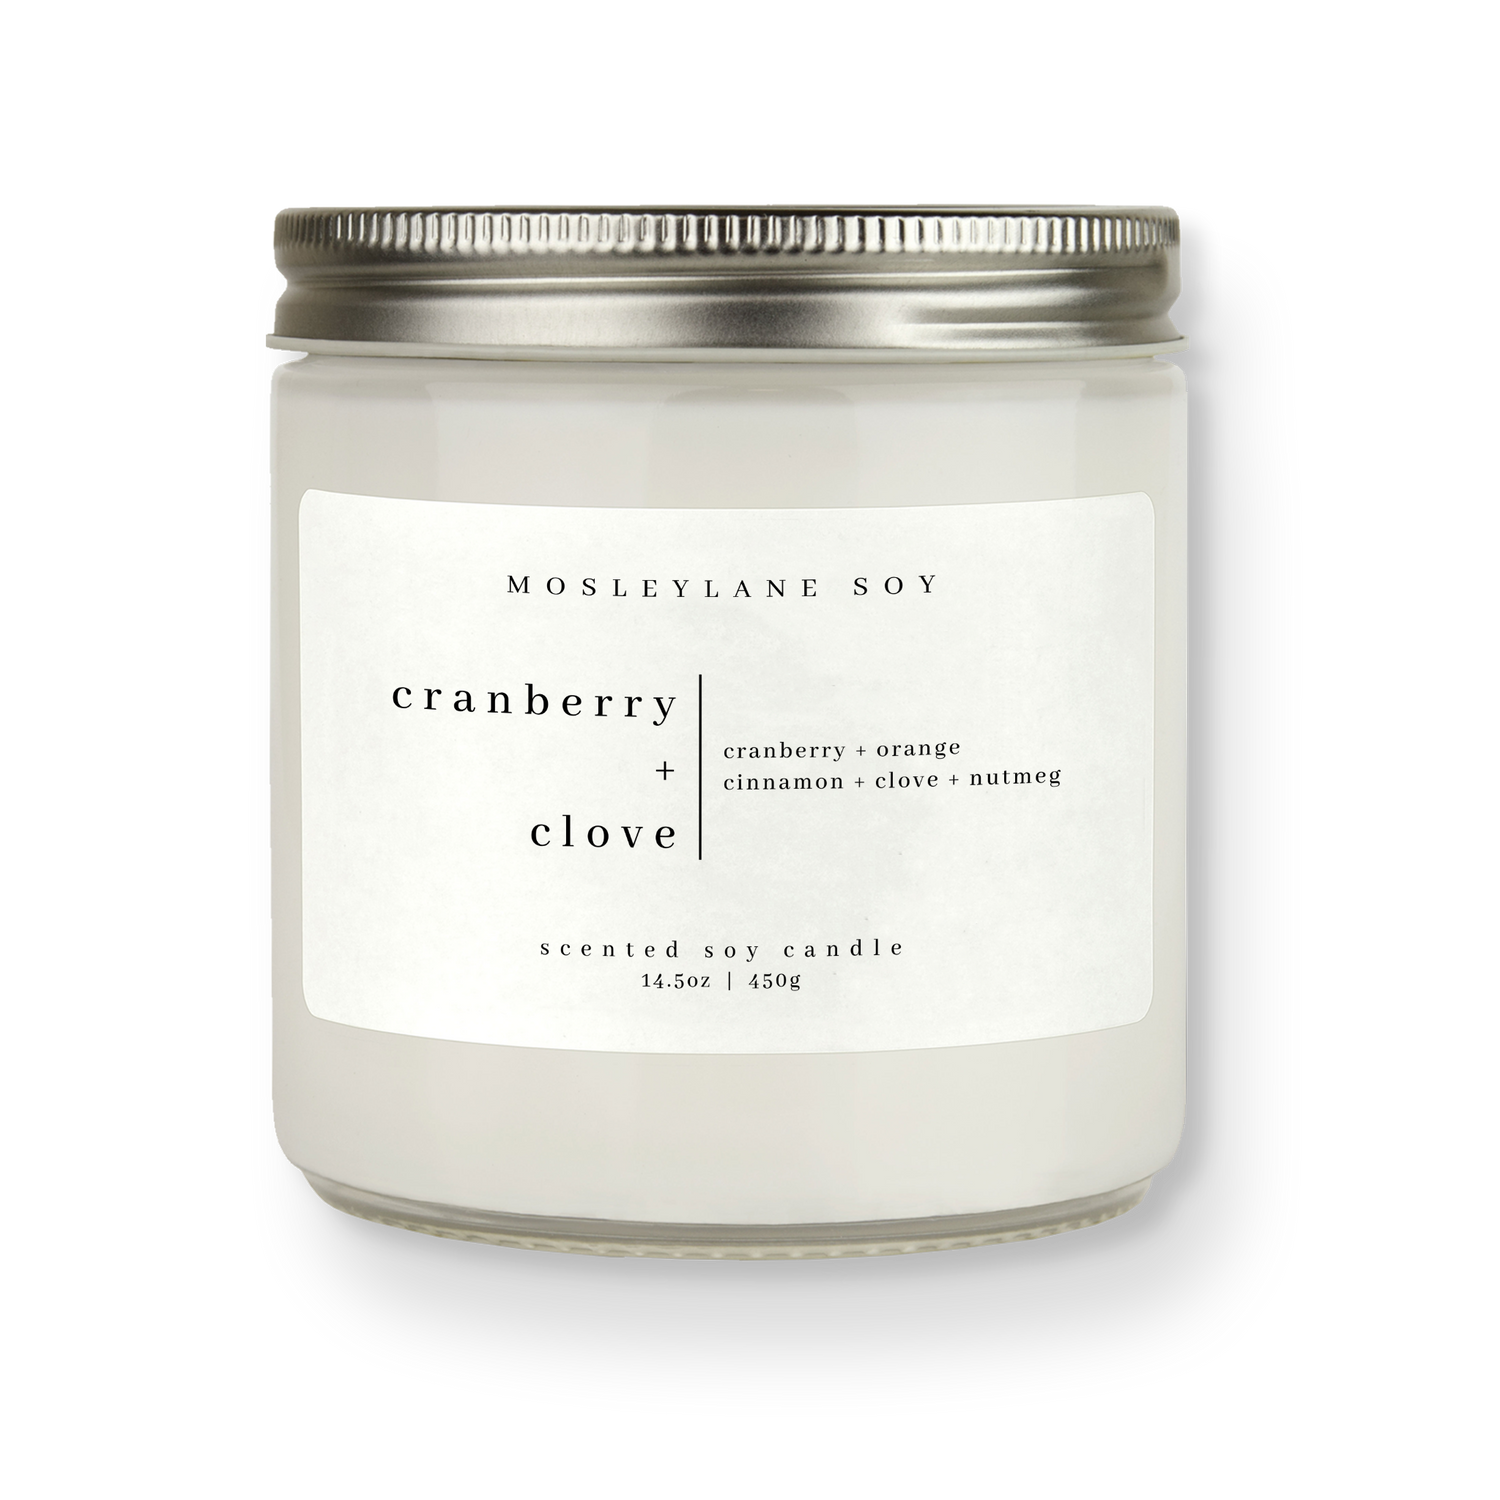 Cranberry + Clove Studio Soy Candle